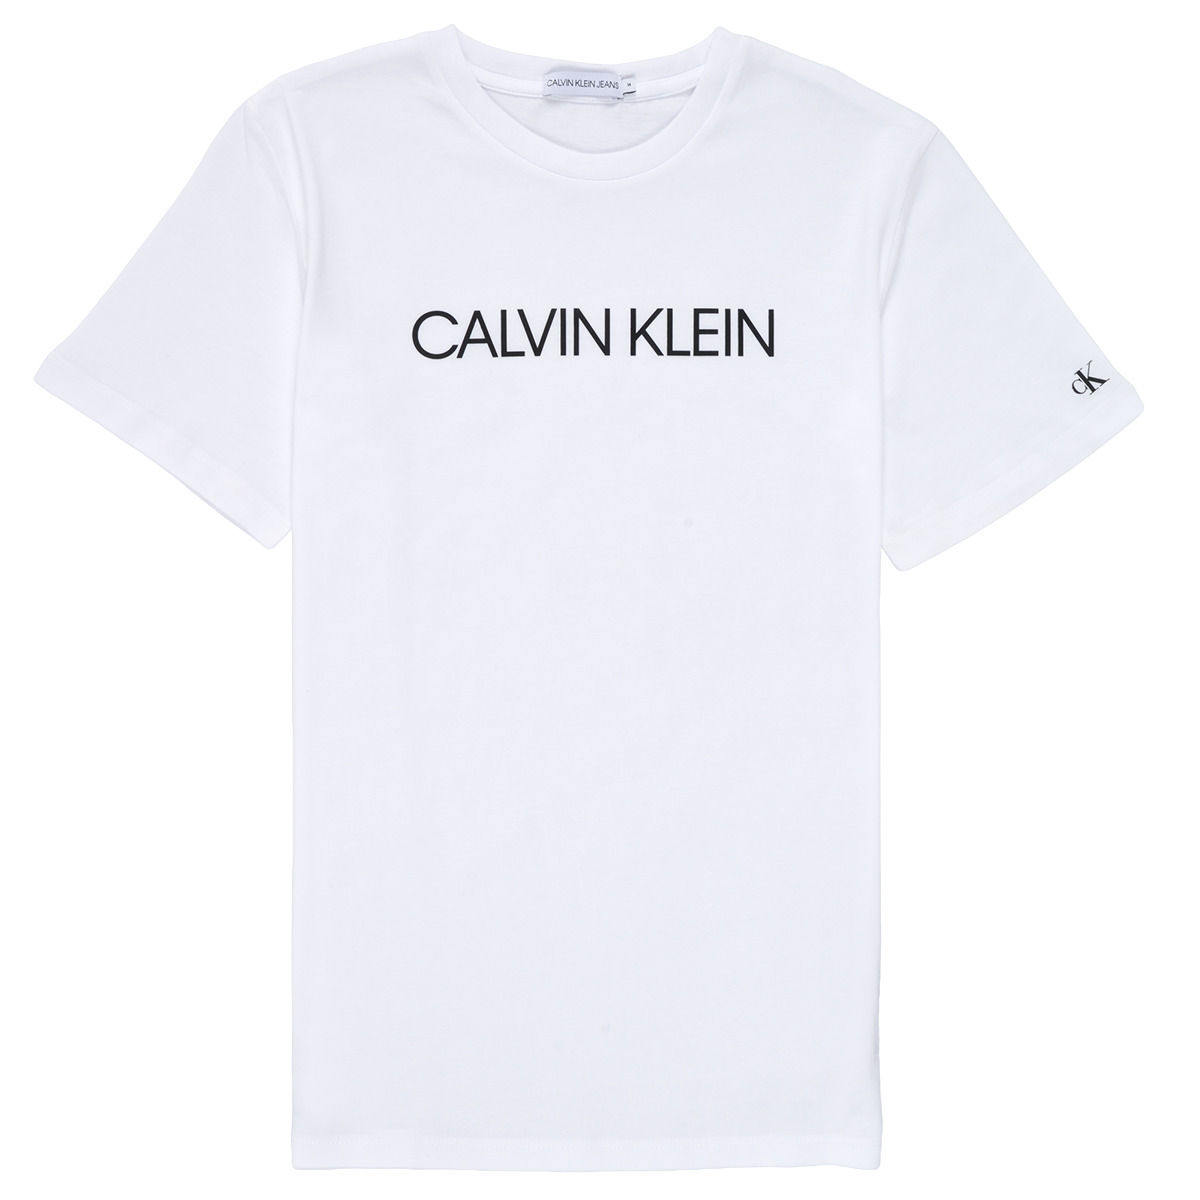 Calvin Klein Jeans INSTITUTIONAL T-SHIRT White - Free delivery | NET ! - Clothing short-sleeved t-shirts Child